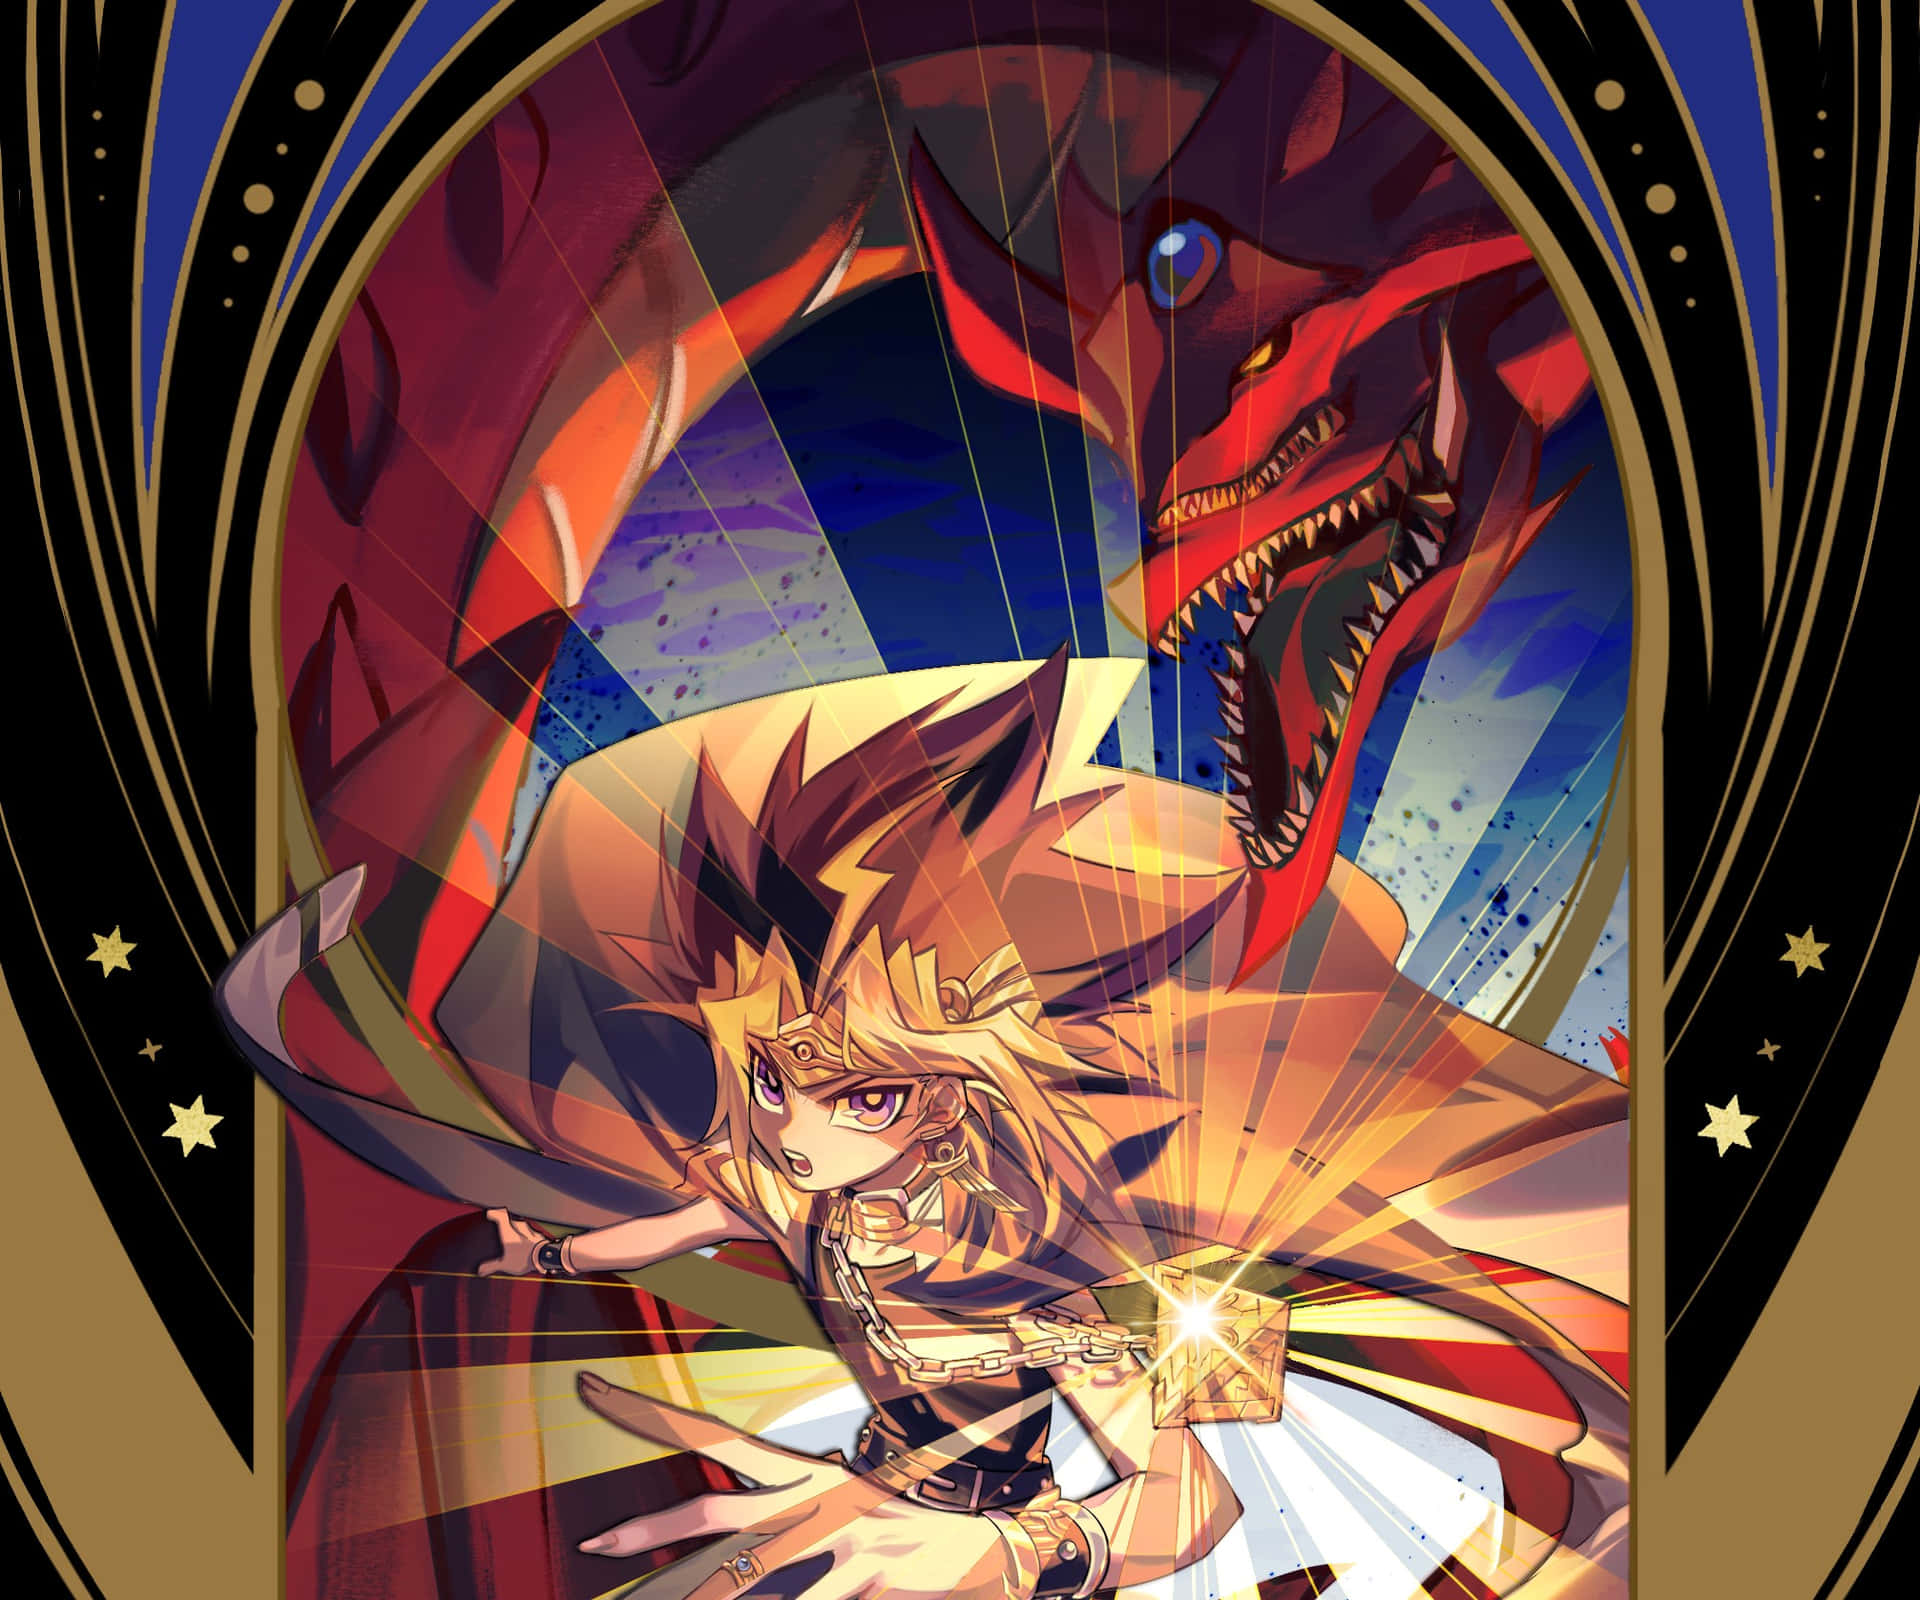 Caption: Yami Yugi, the protector of the cards Wallpaper